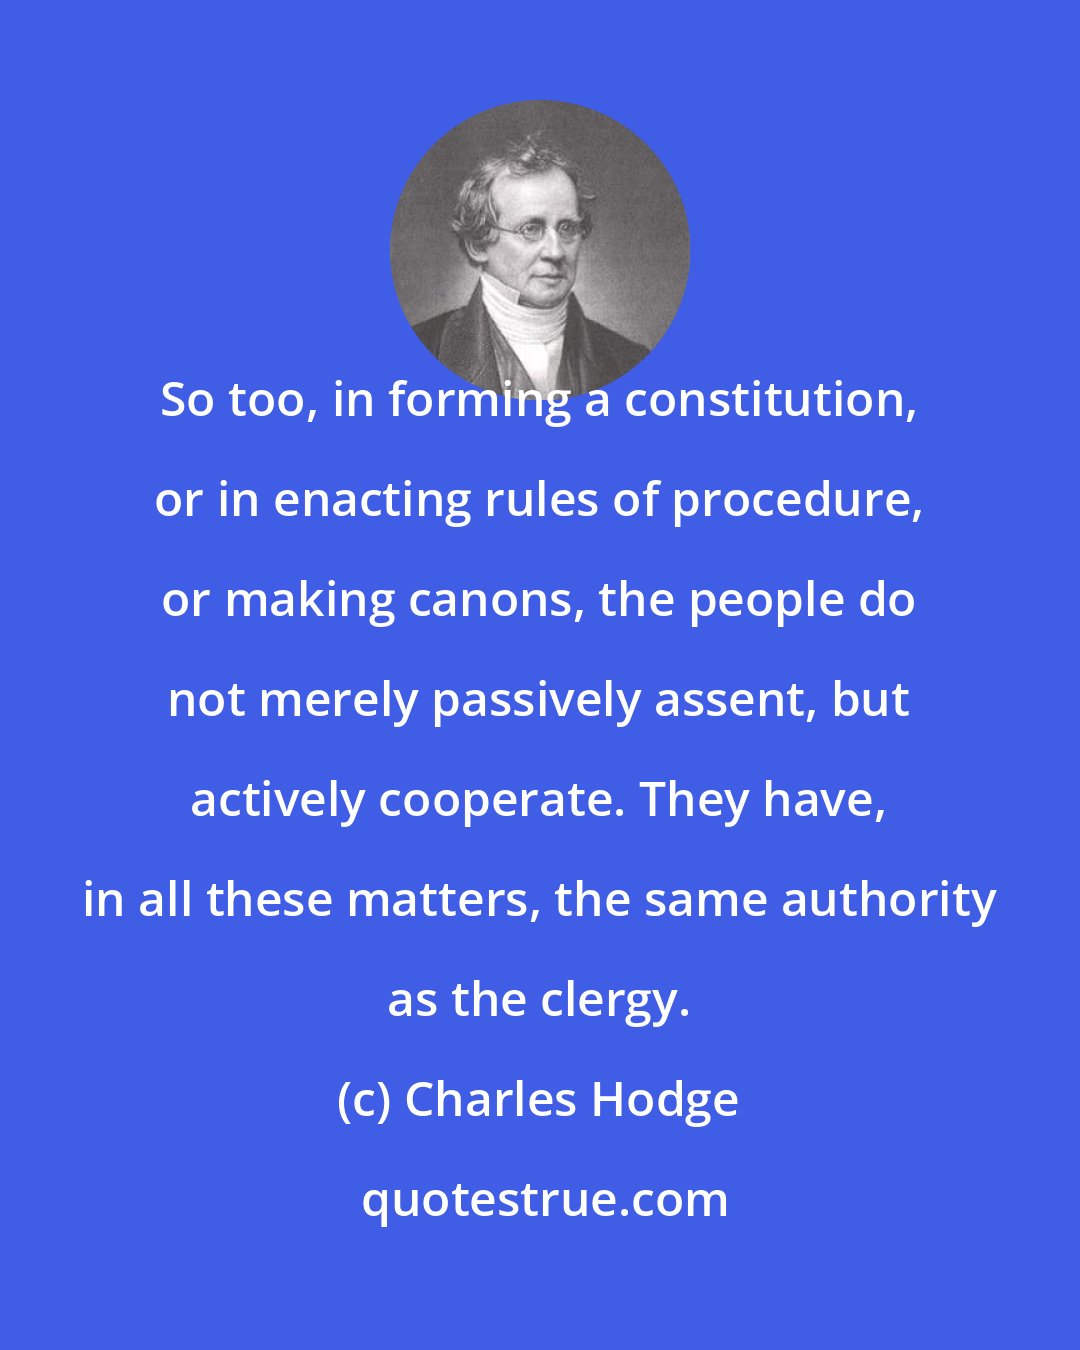 Charles Hodge: So too, in forming a constitution, or in enacting rules of procedure, or making canons, the people do not merely passively assent, but actively cooperate. They have, in all these matters, the same authority as the clergy.